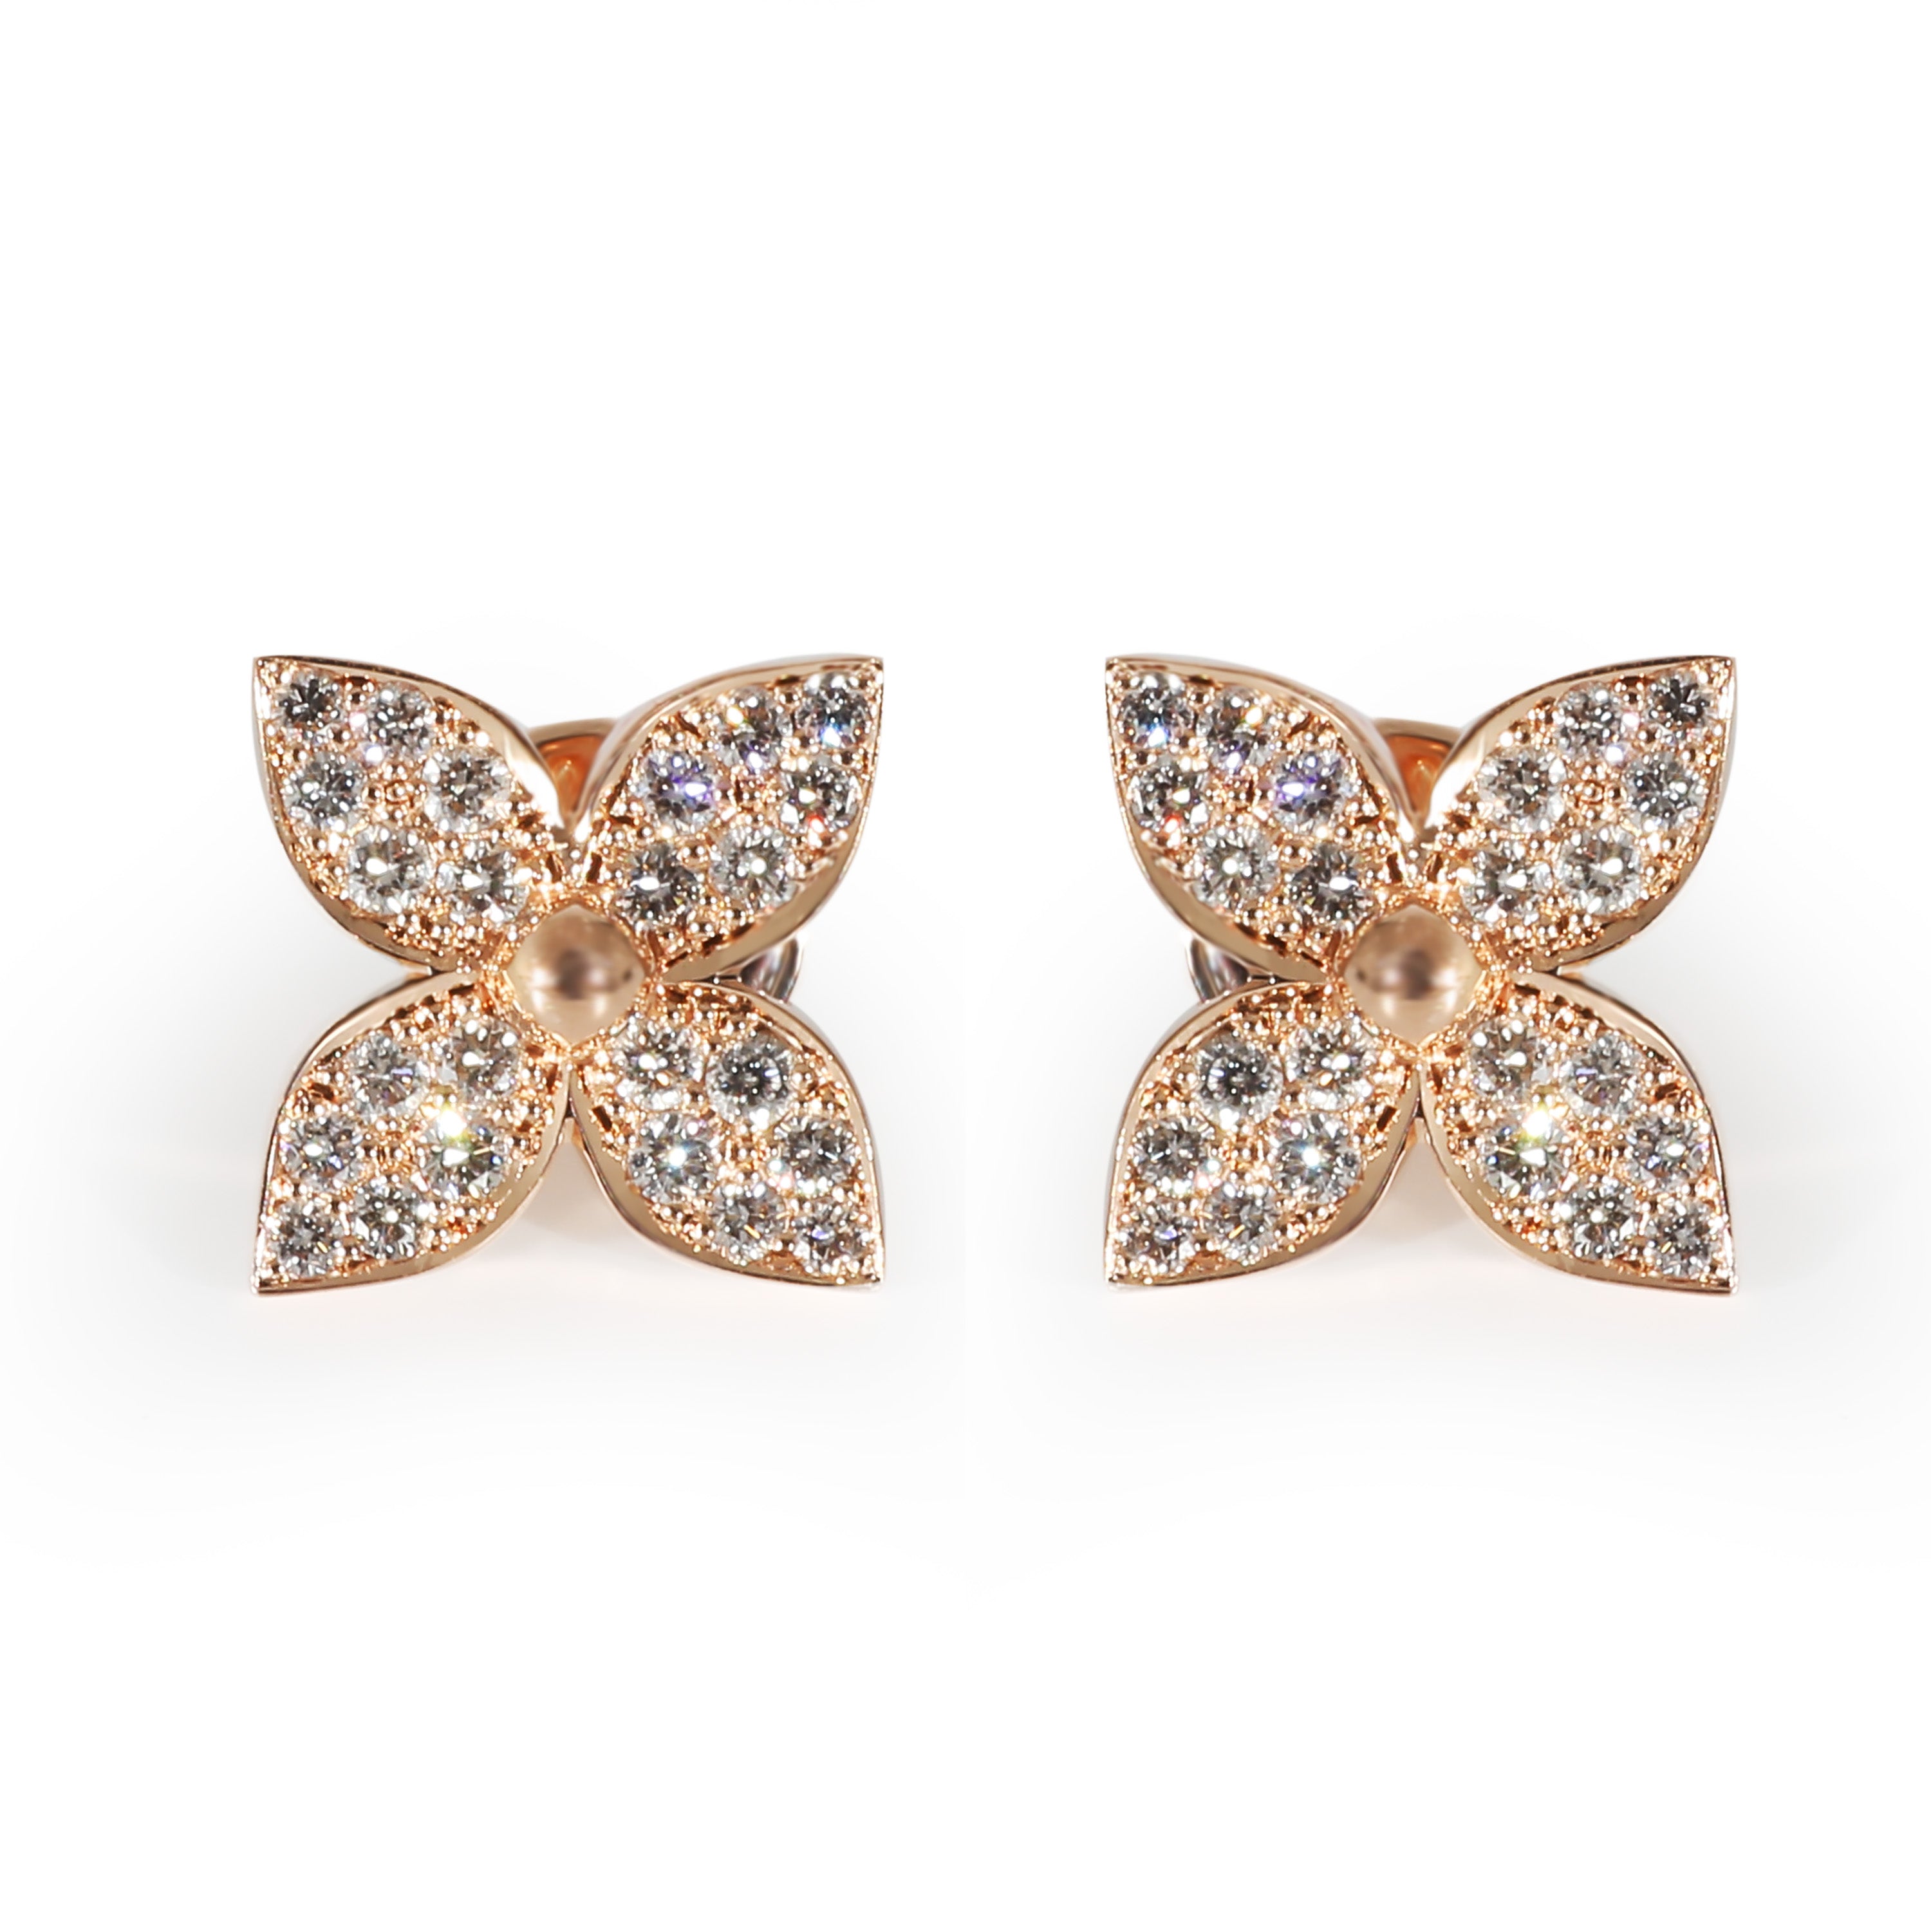 Louis Vuitton Color Blossom Bb Star Earrings In 18k Rose Gold 0.08 Ctw  Auction